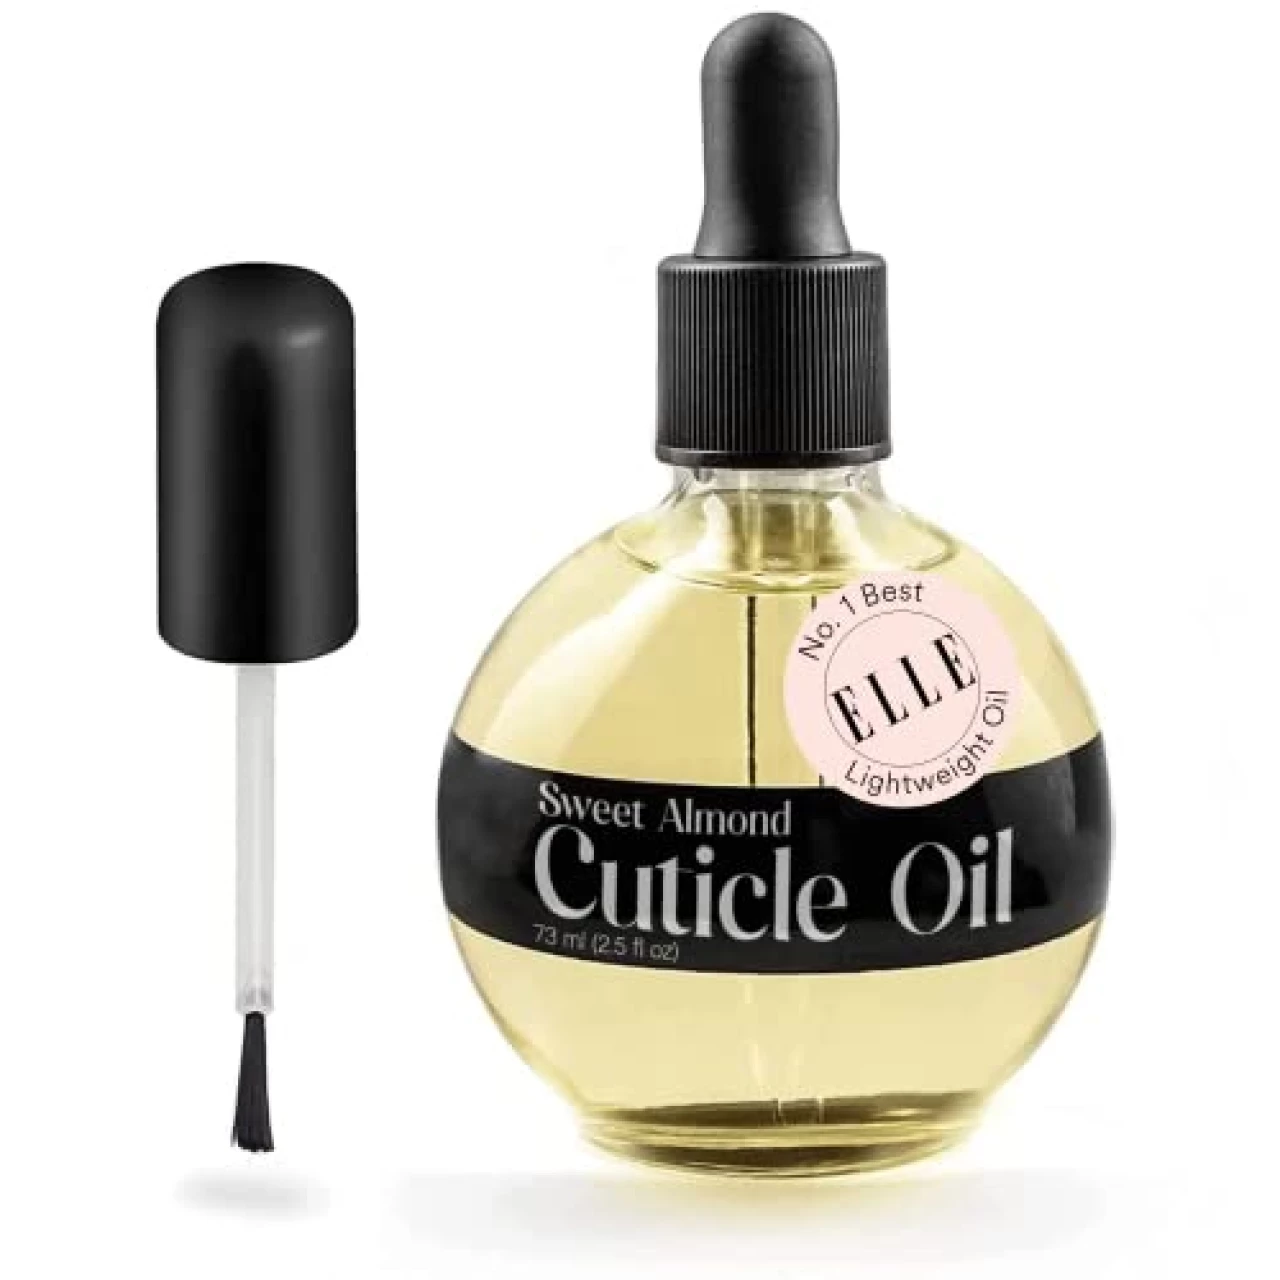 C CARE Sweet Almond Cuticle Oil - Extra Large 2.5 oz bottle - Moisturizes and Strengthens Nails and Cuticles - Dropper &amp; Brush included